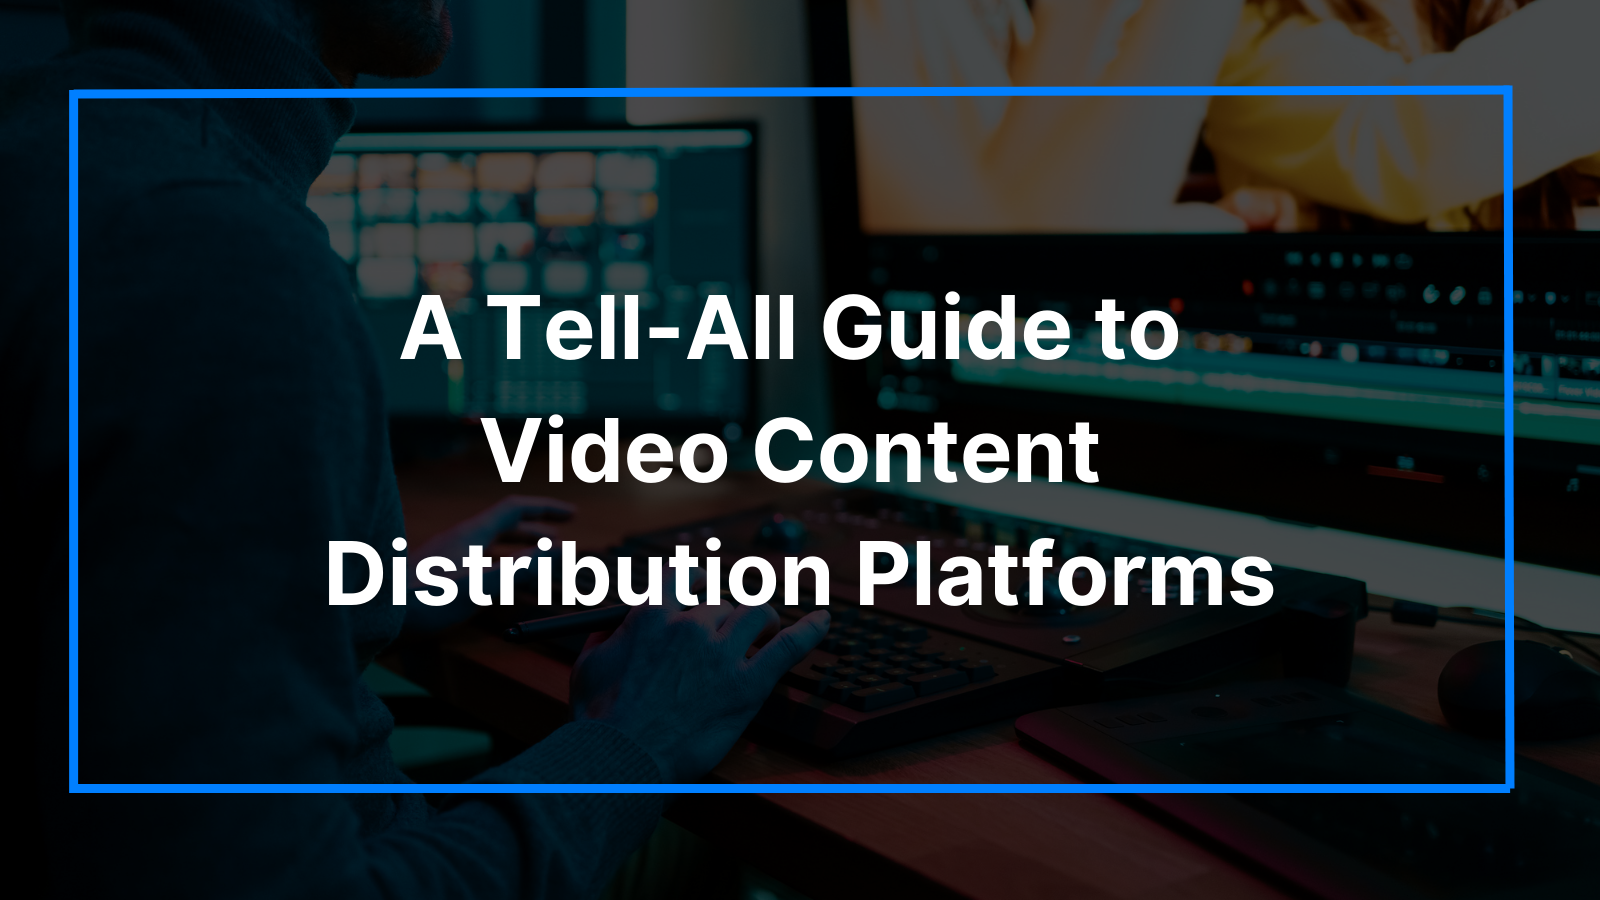 A Tell-All Guide to Video Content Distribution Platforms